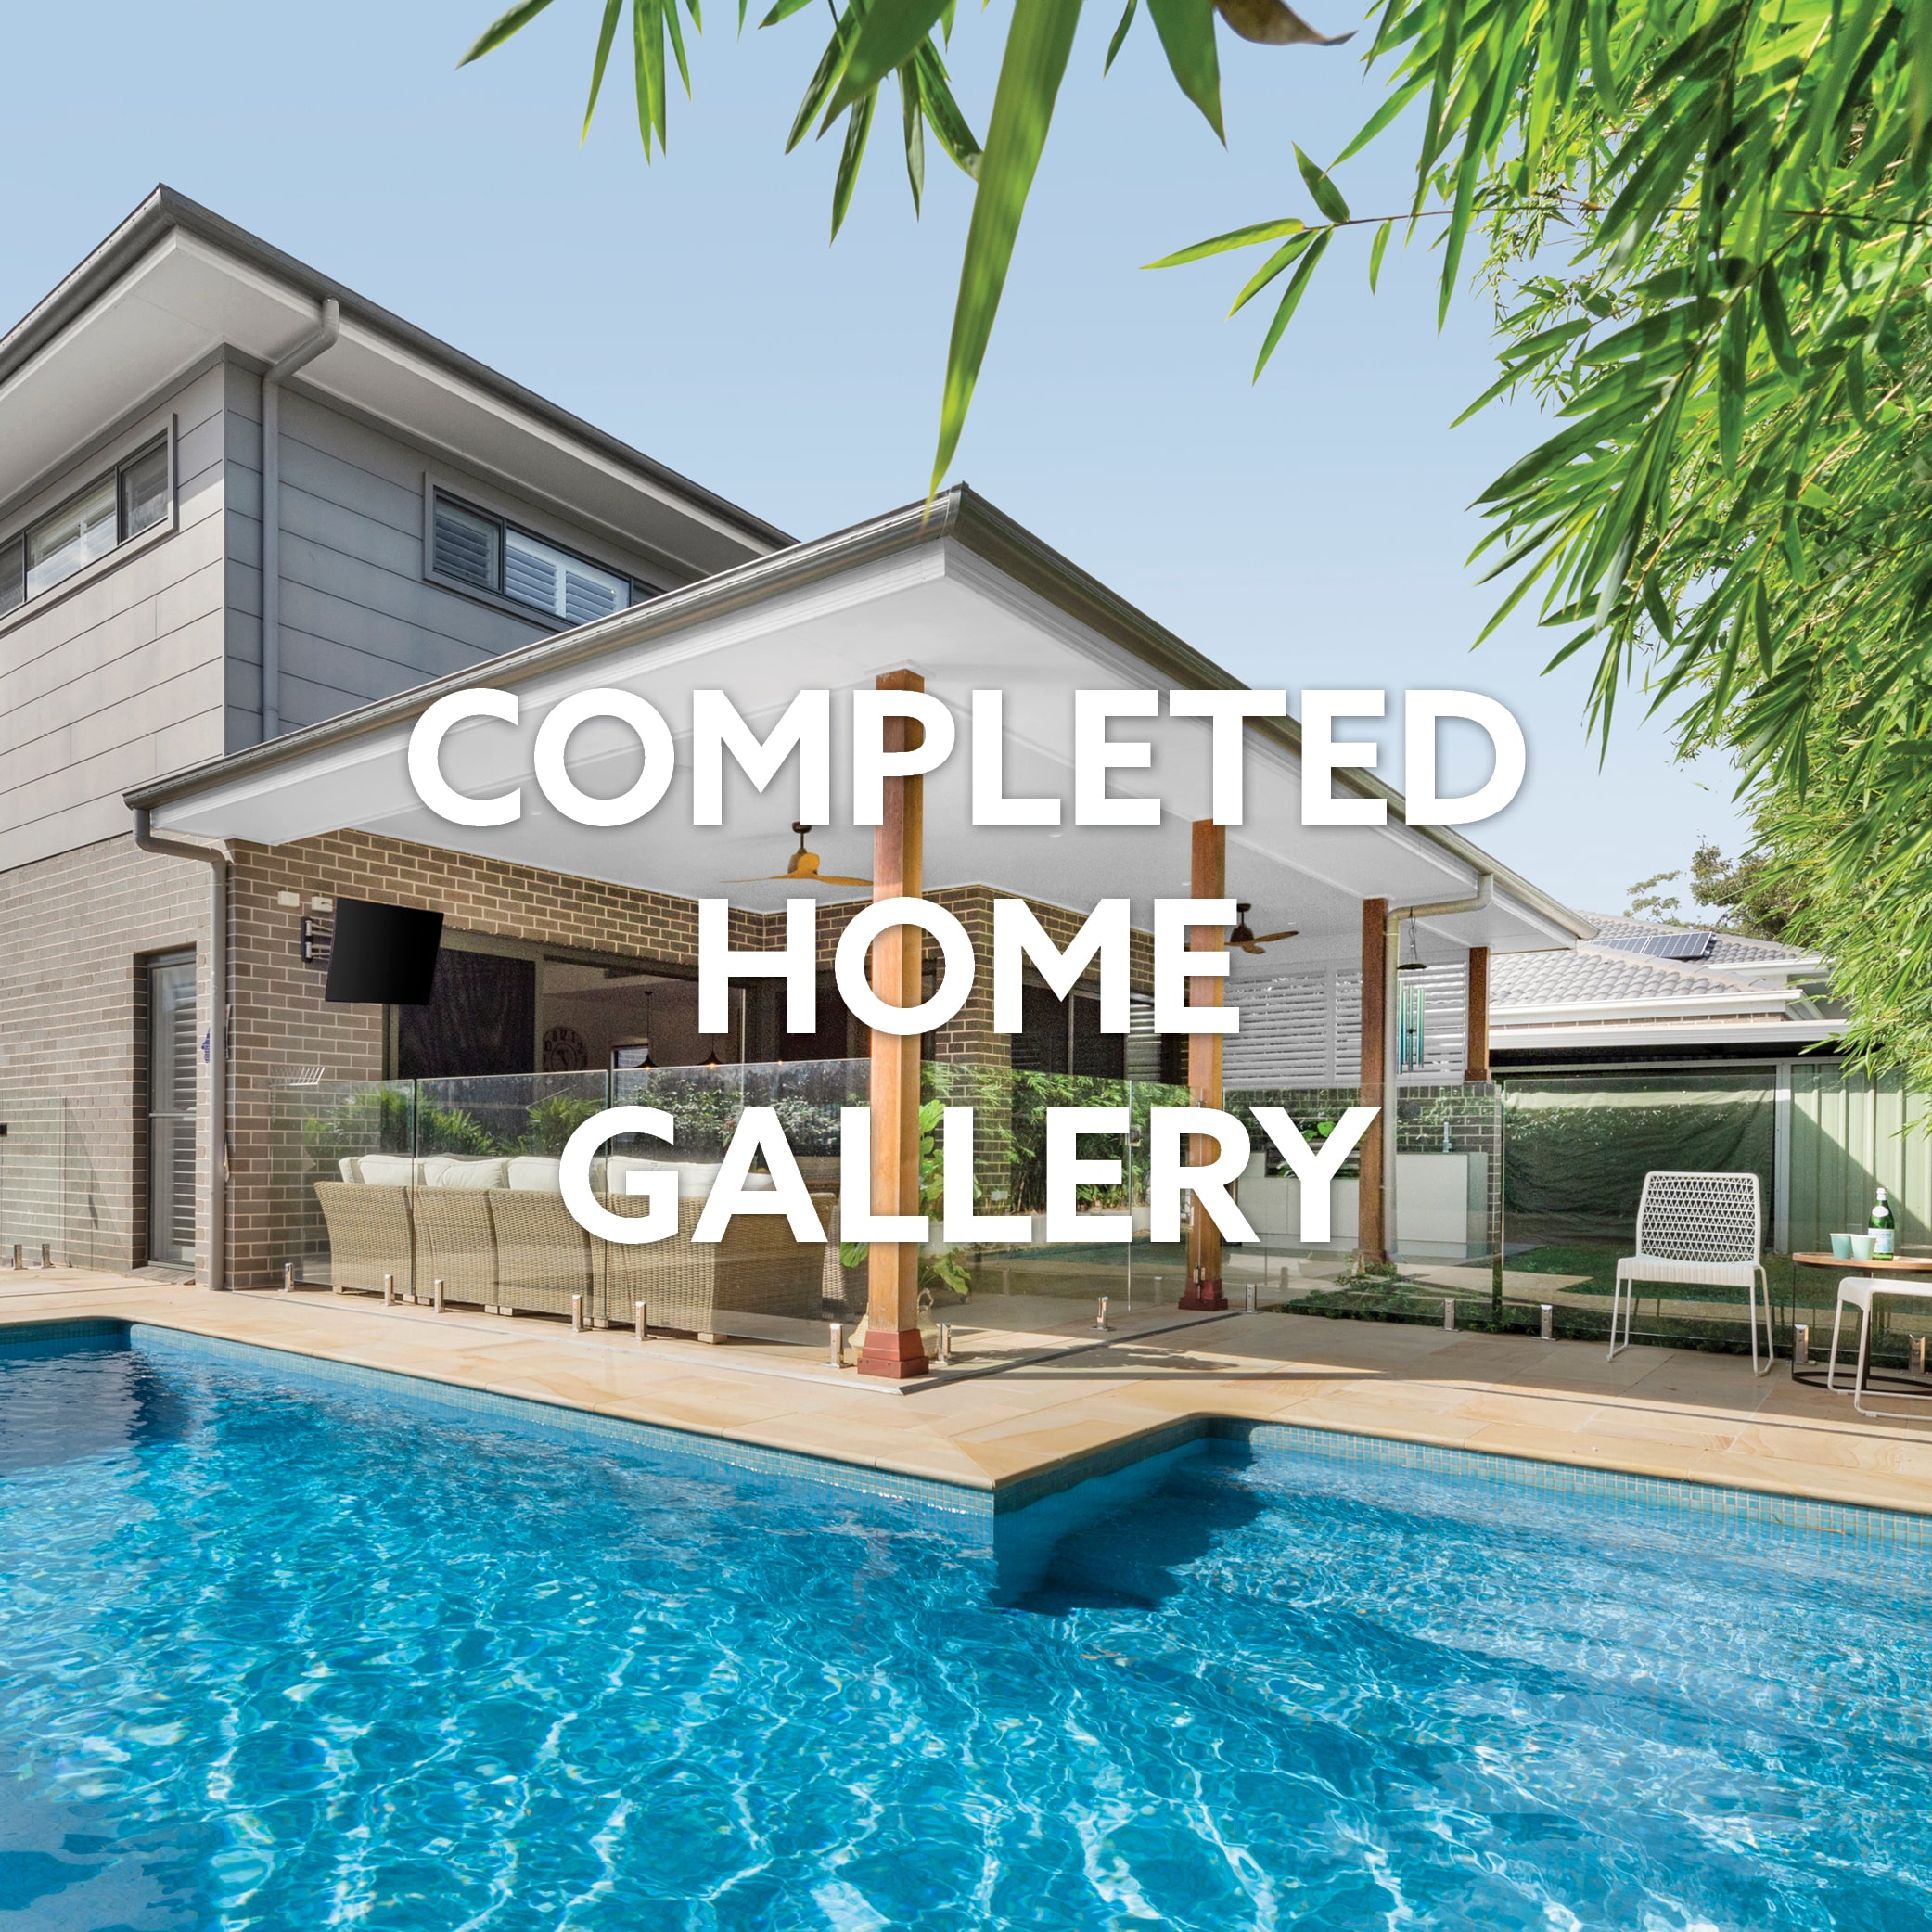 Completed Home Gallery